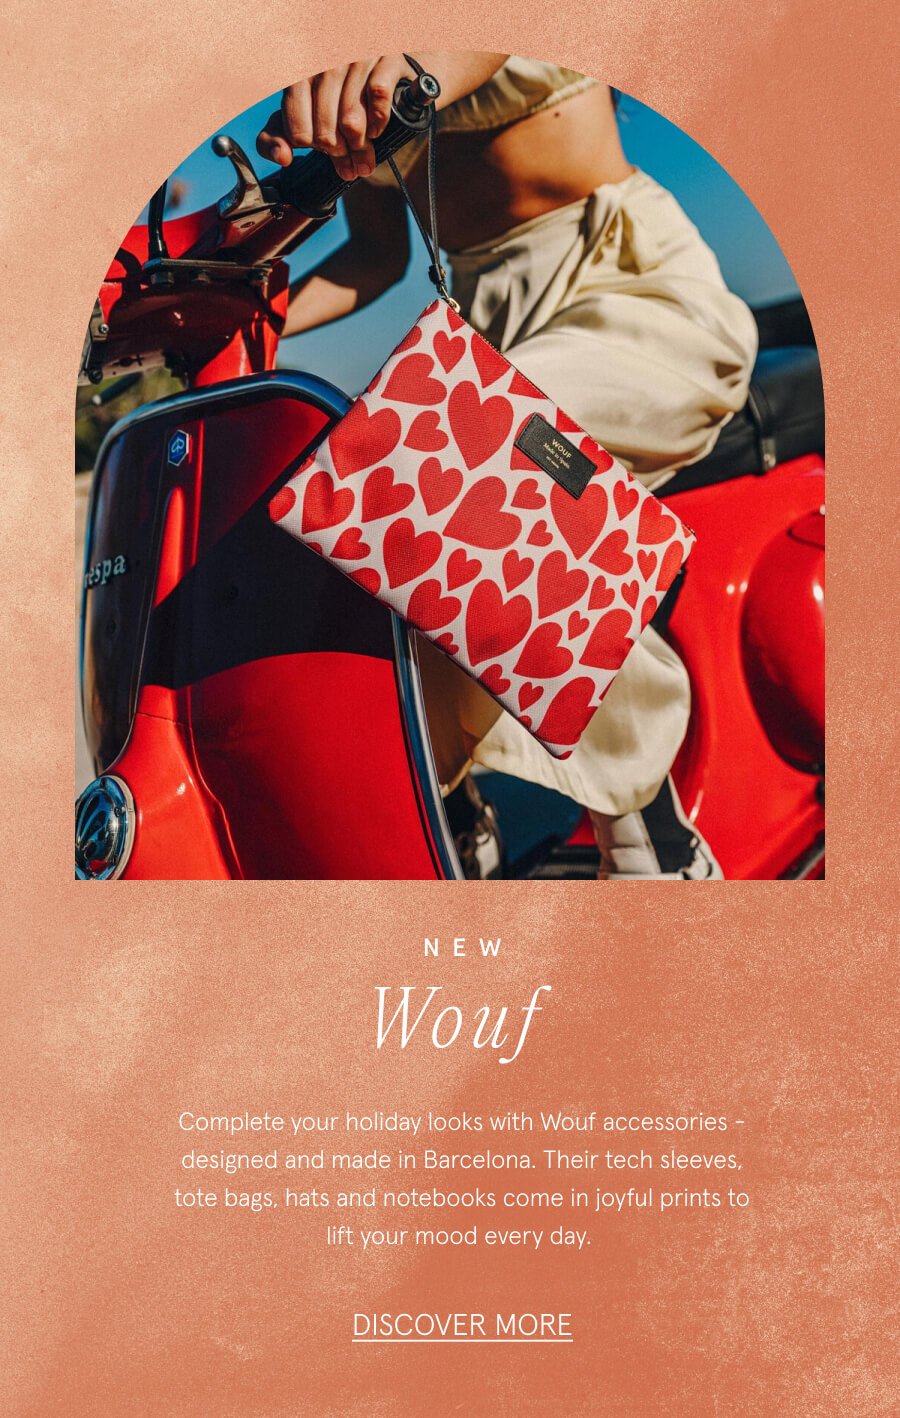 NEW Wouf Complete your holiday looks with Wouf accessories - designed and made in Barcelona. Their tech sleeves, tote bags, hats and notebooks come in joyful prints to lift your mood every day. DISCOVER MORE